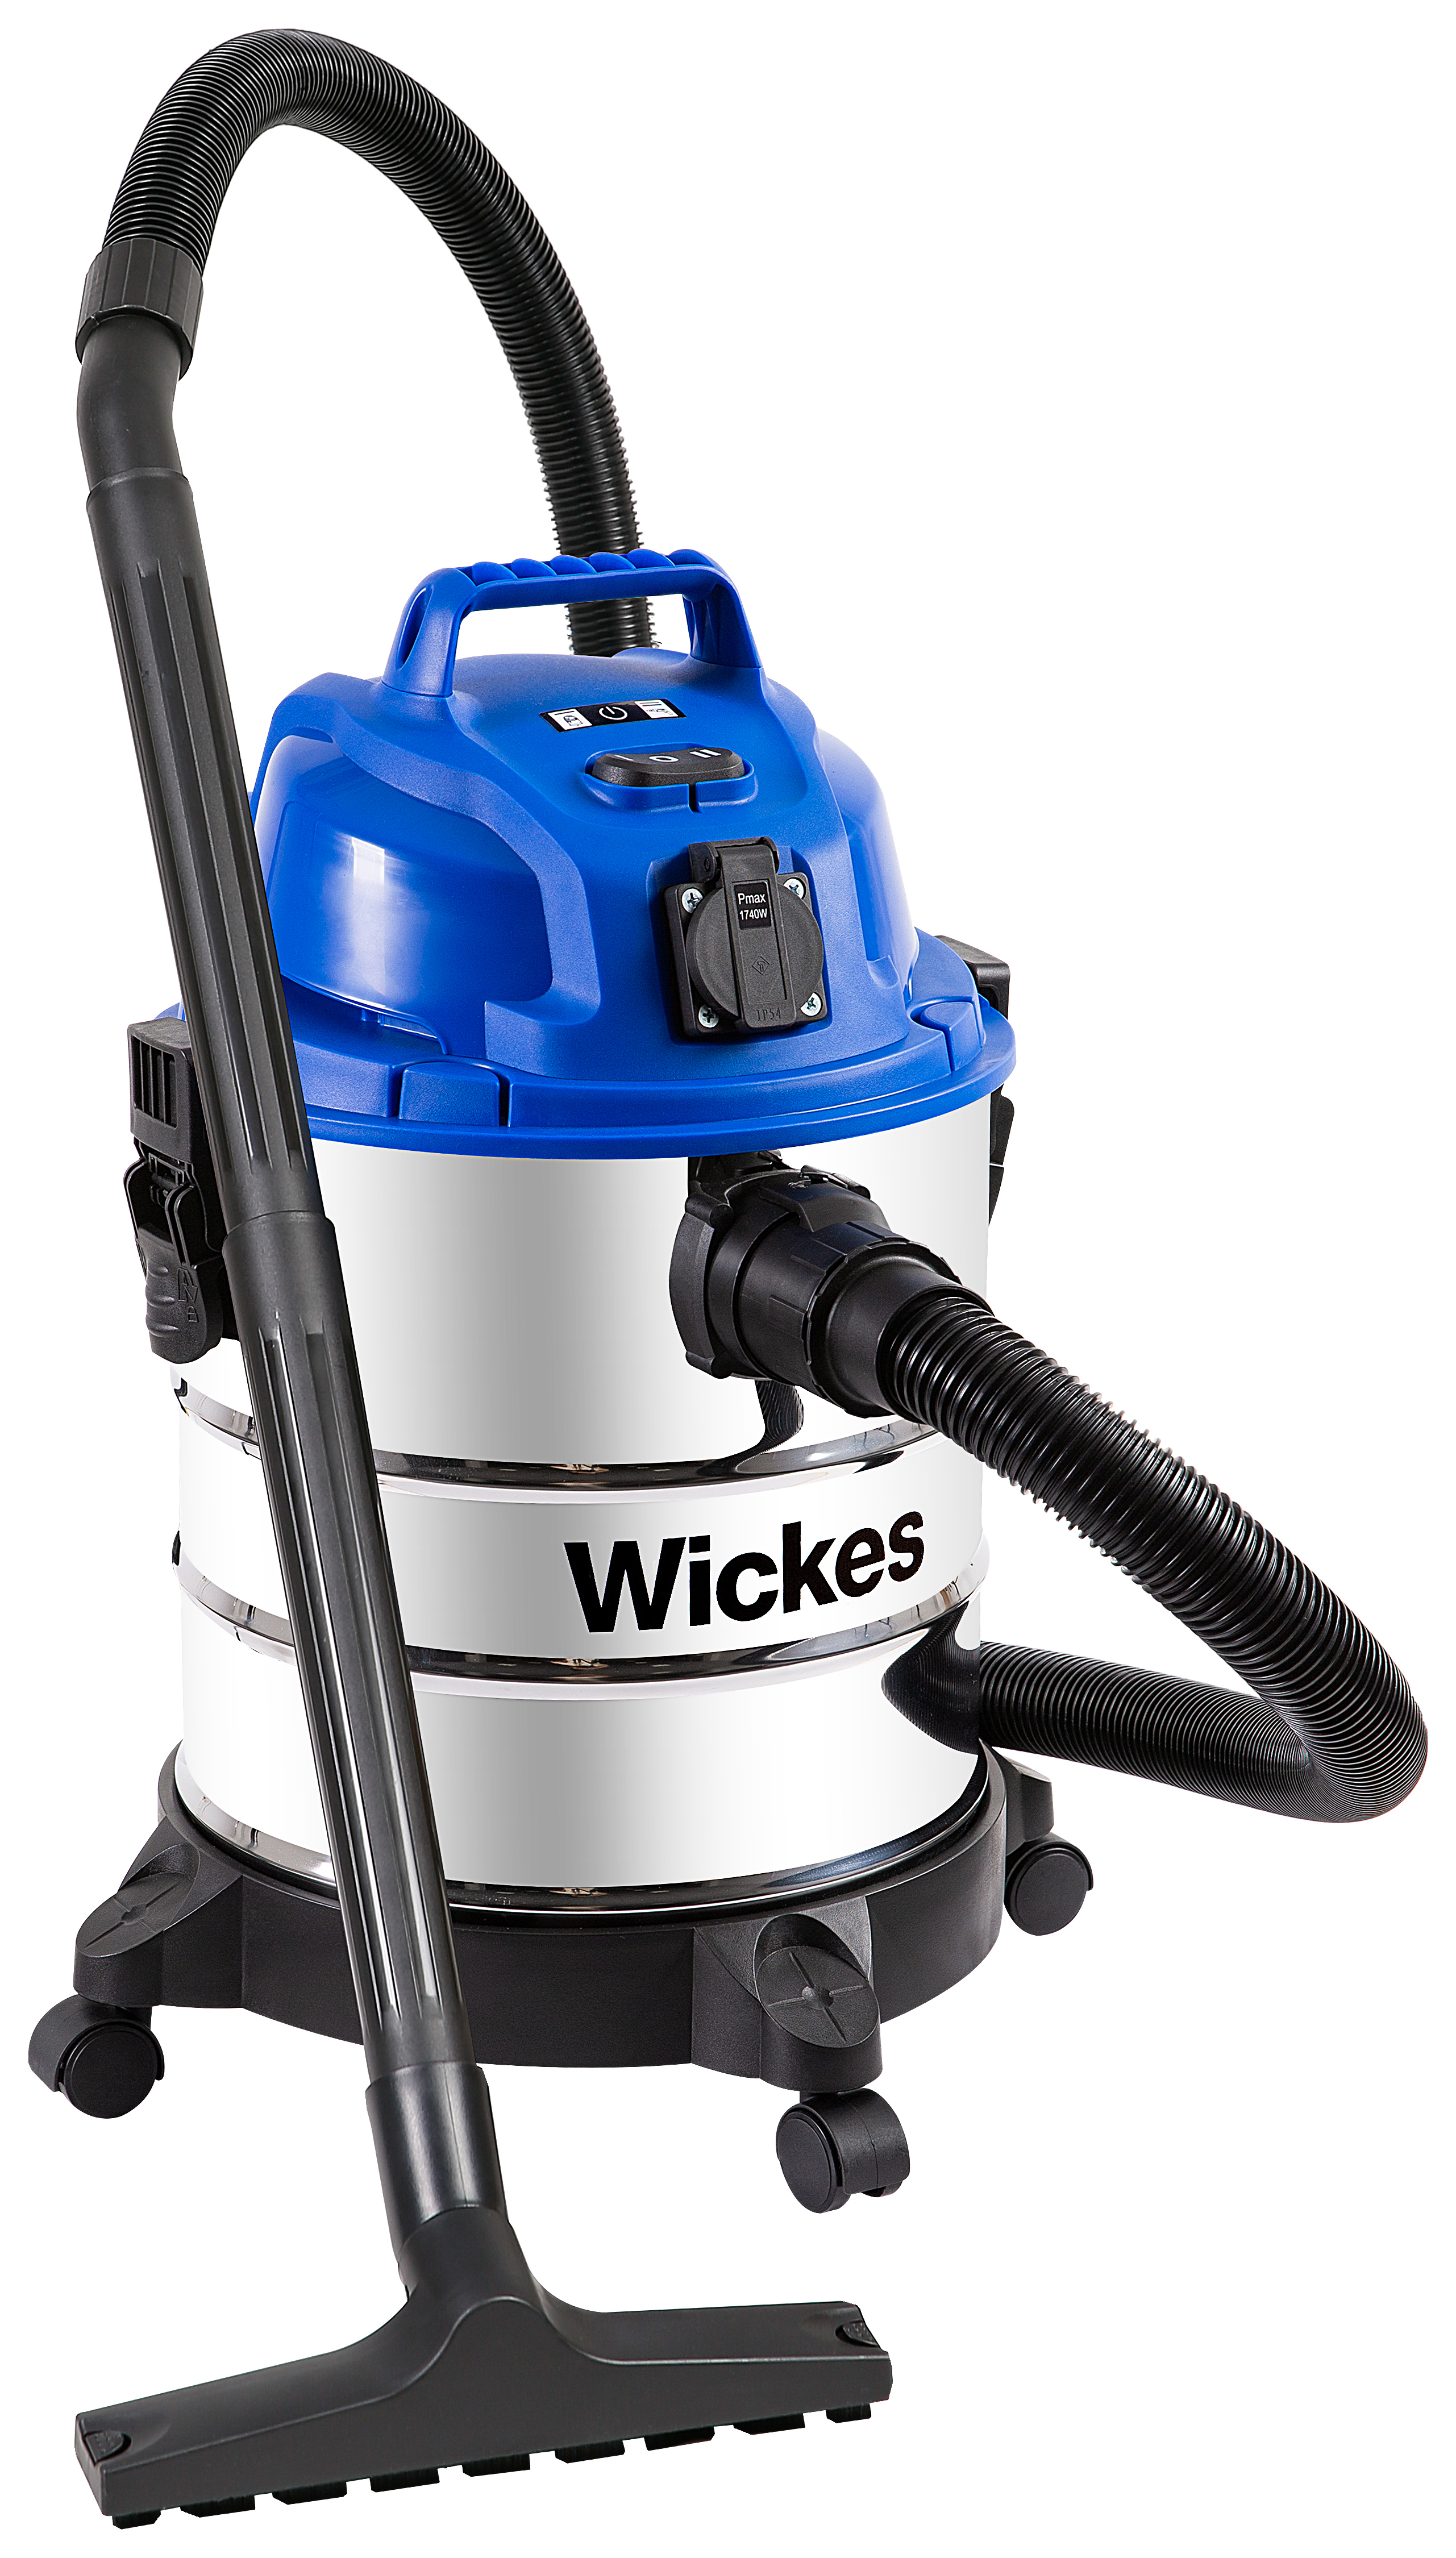 Wickes 20L Wet & Dry Vacuum Cleaner with Power Take Off - 1250W